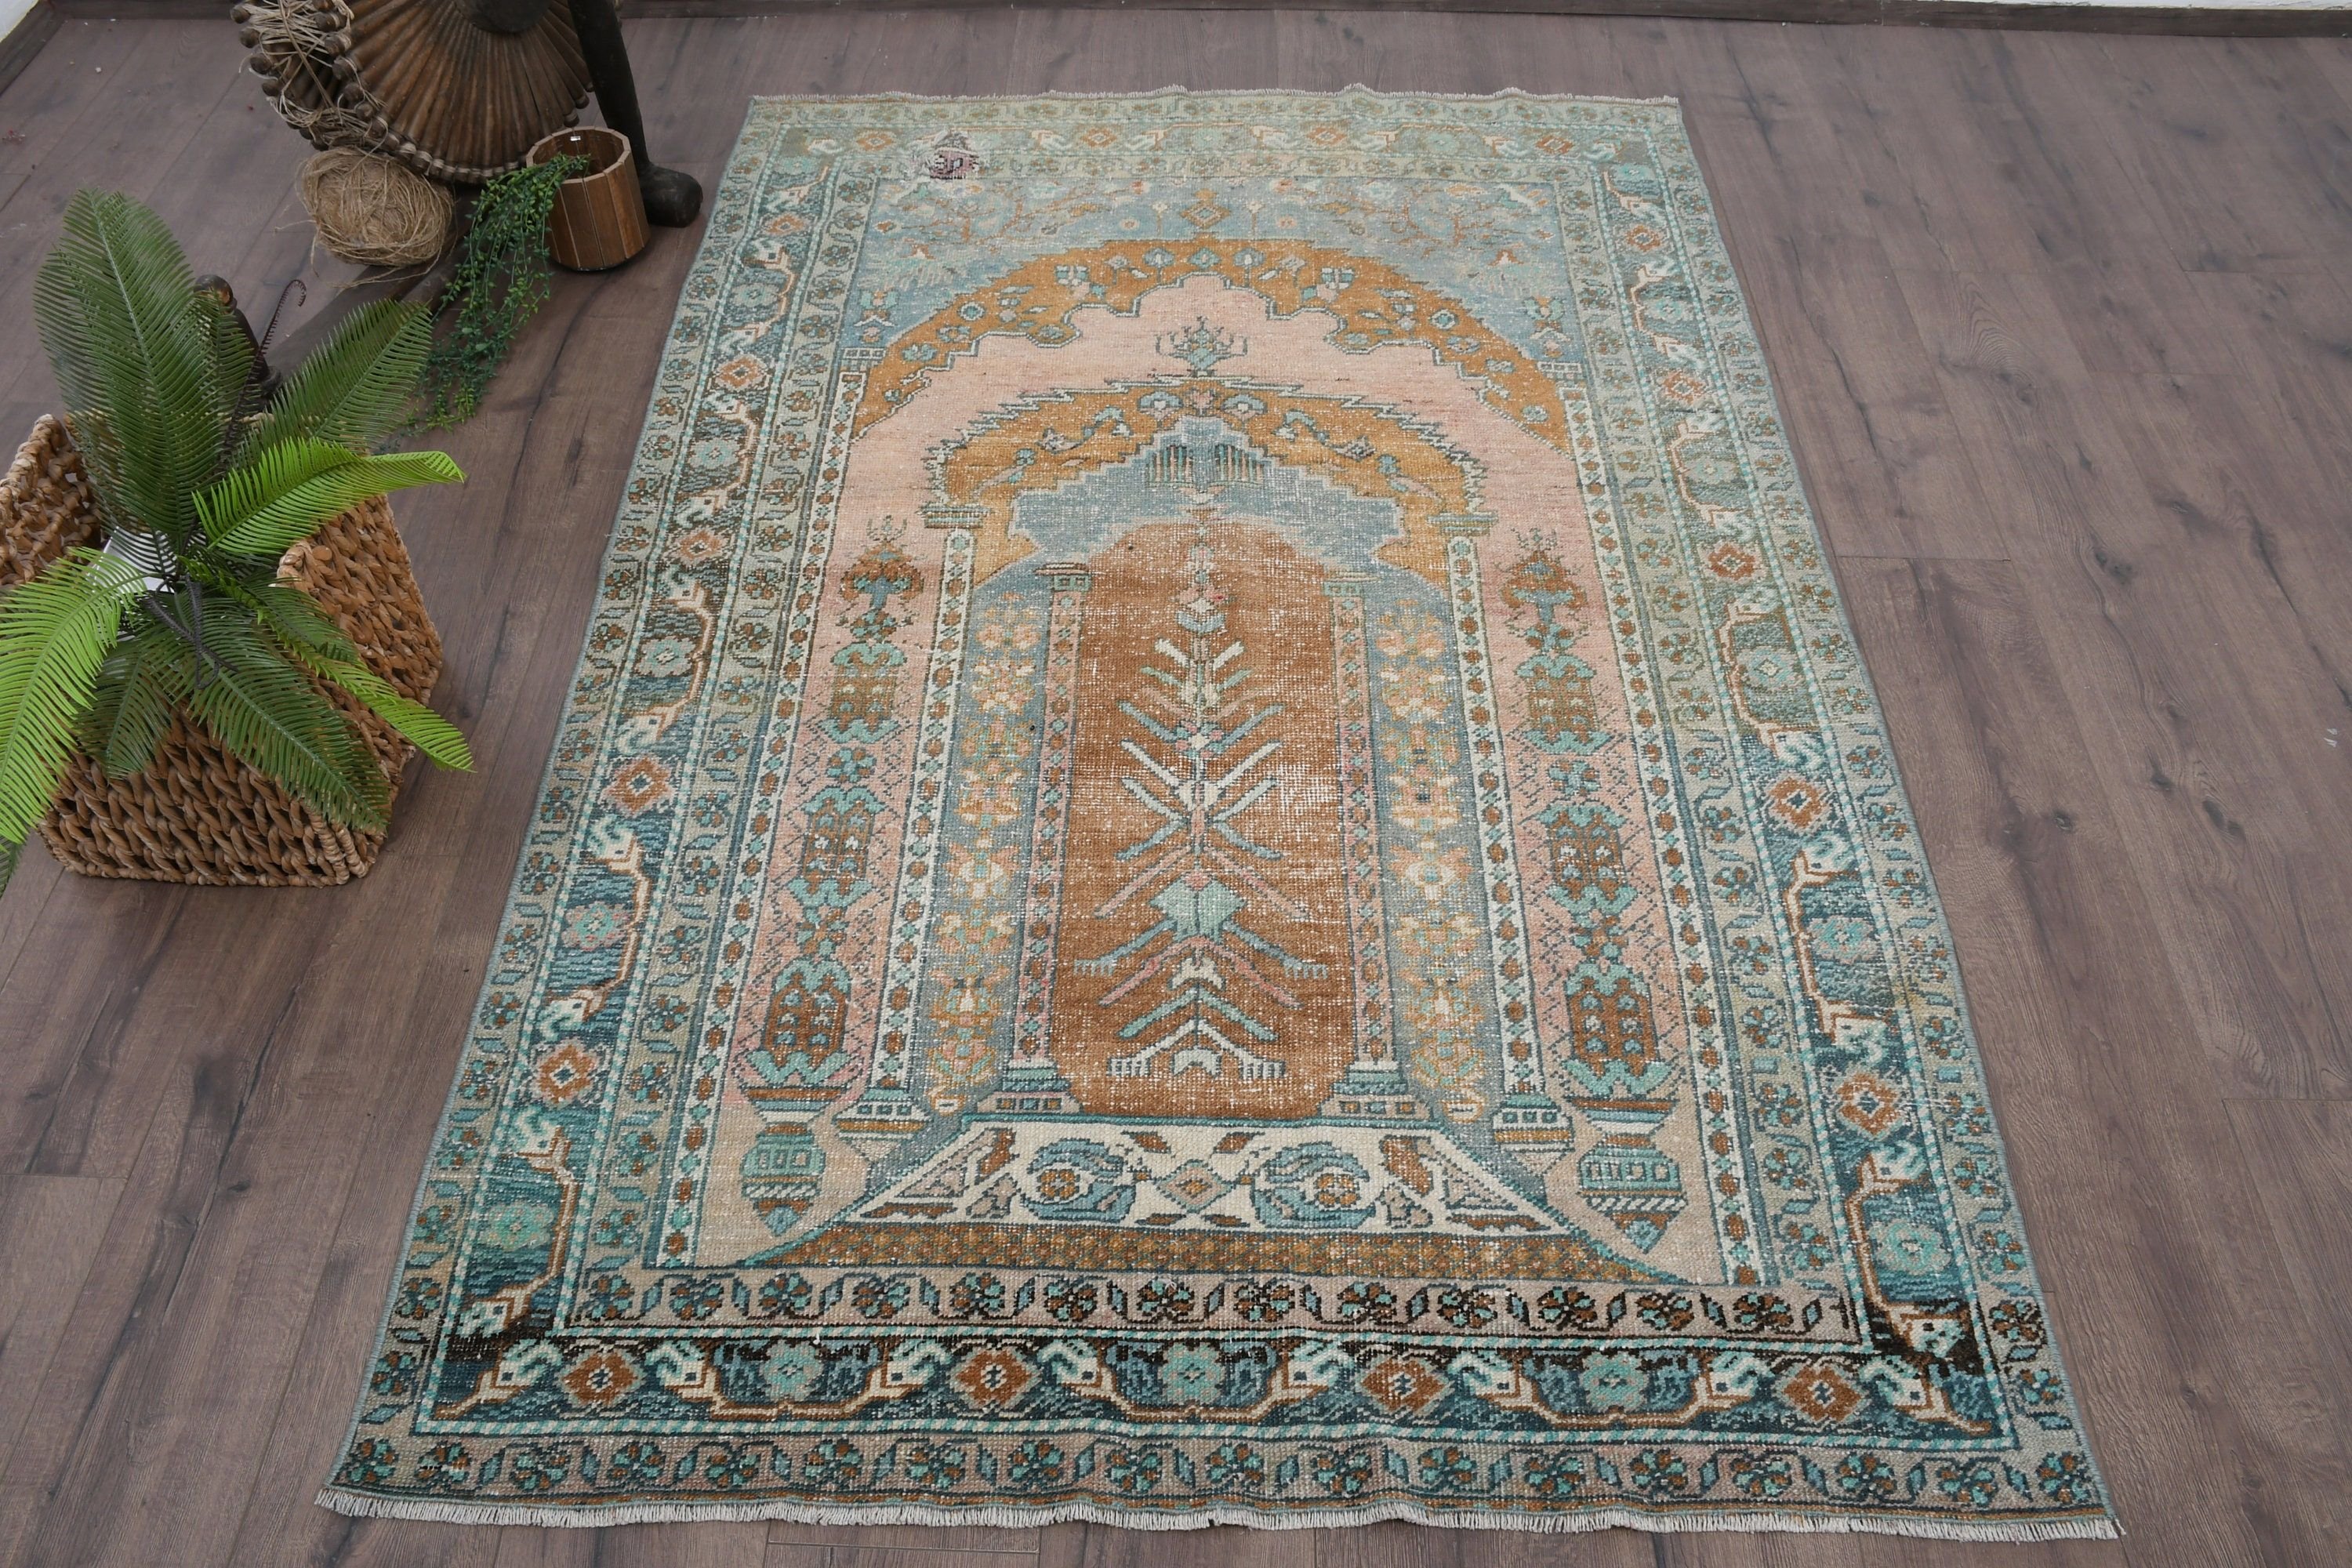 Rugs for Dining Room, Vintage Rug, 4.2x6.4 ft Area Rugs, Oriental Rug, Kitchen Rug, Turkish Rug, Green Oriental Rugs, Home Decor Rug